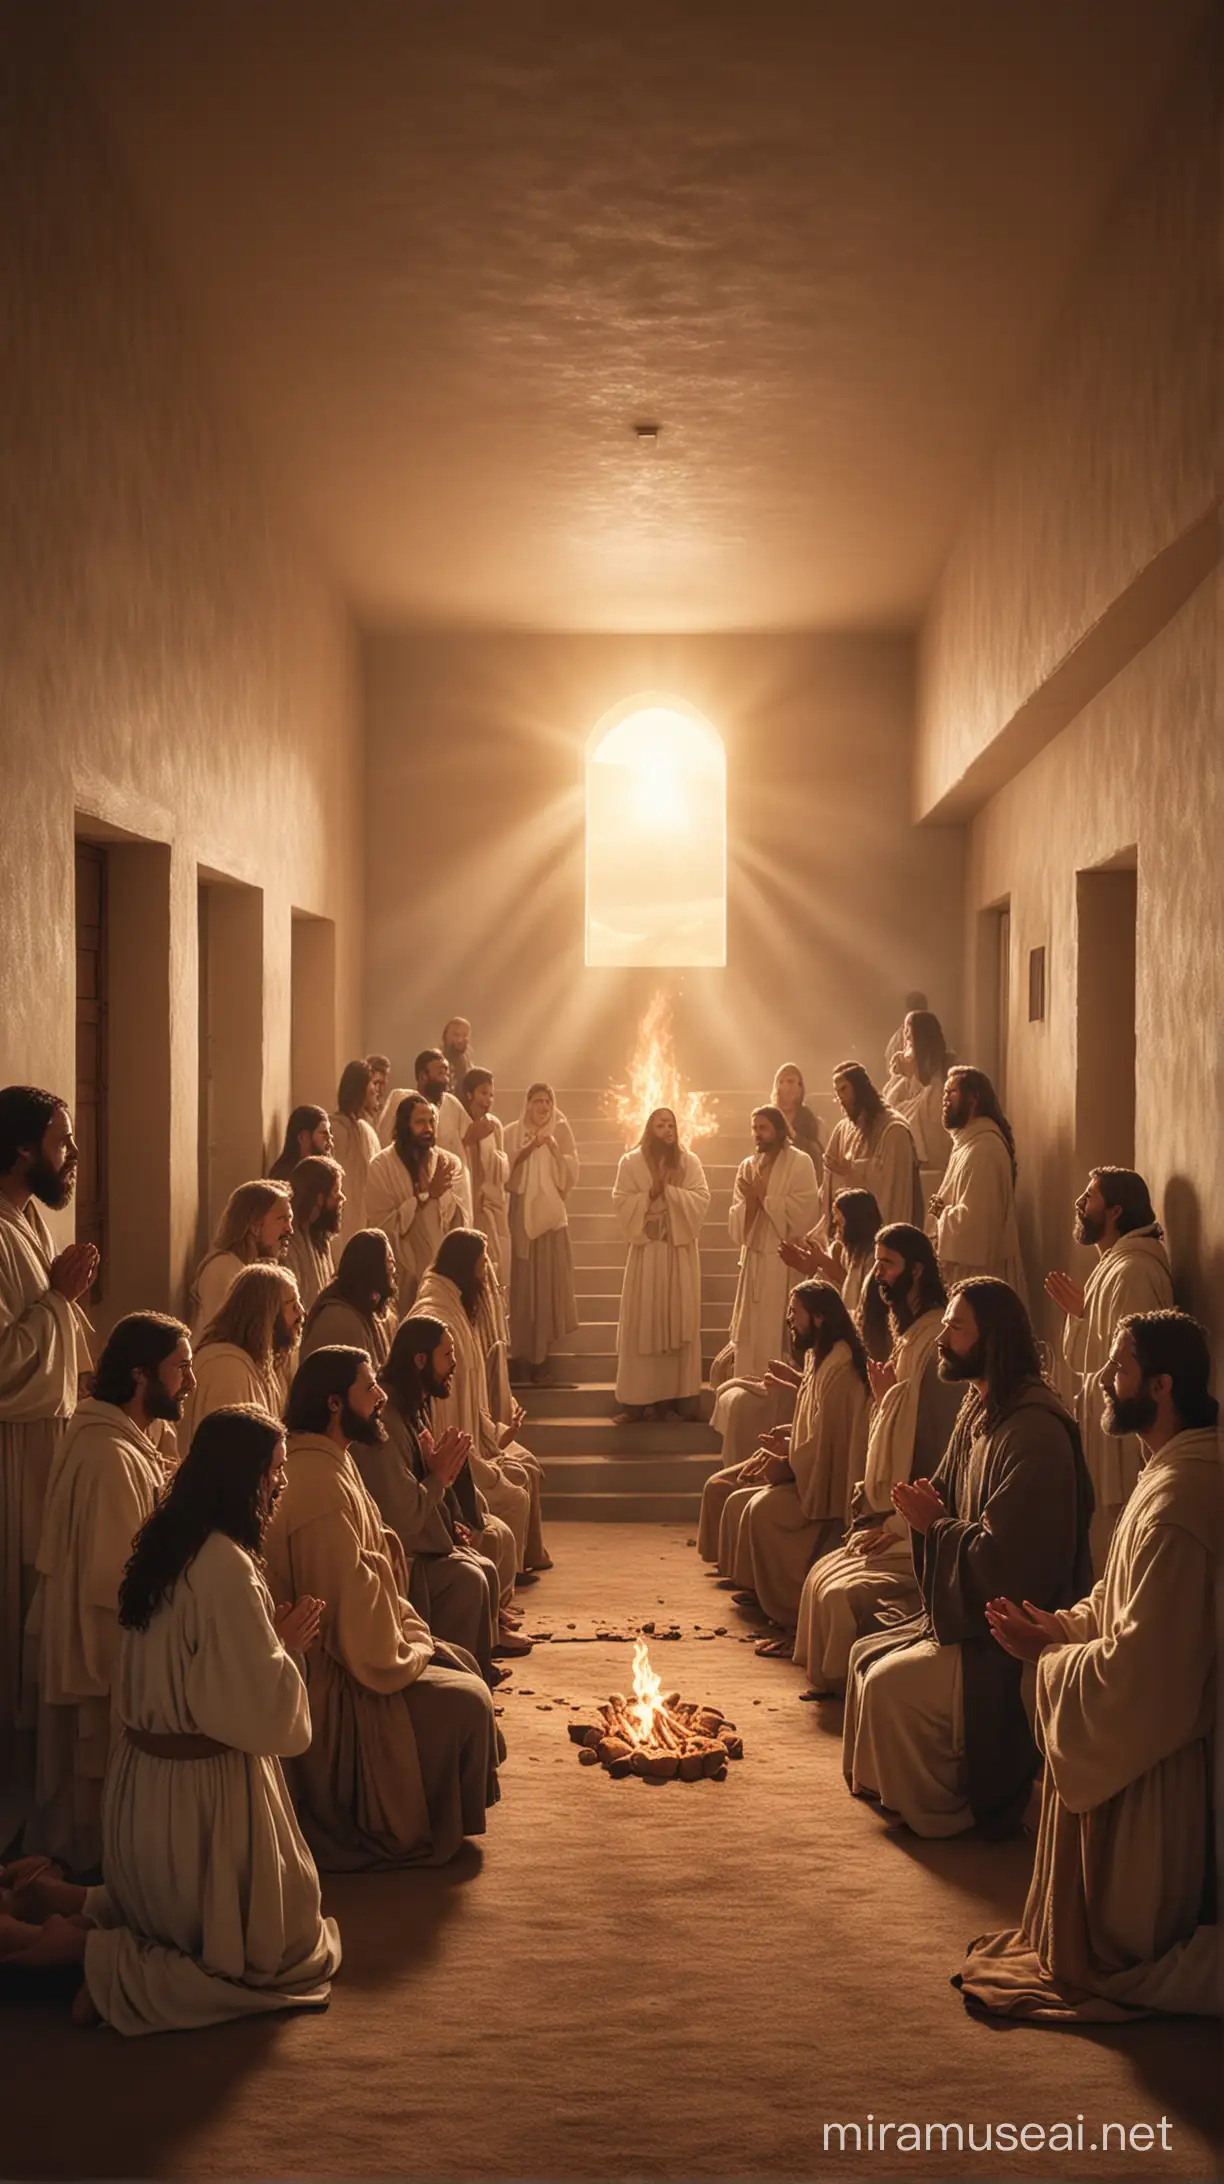 Disciples of Jesus Praying with Divine Light